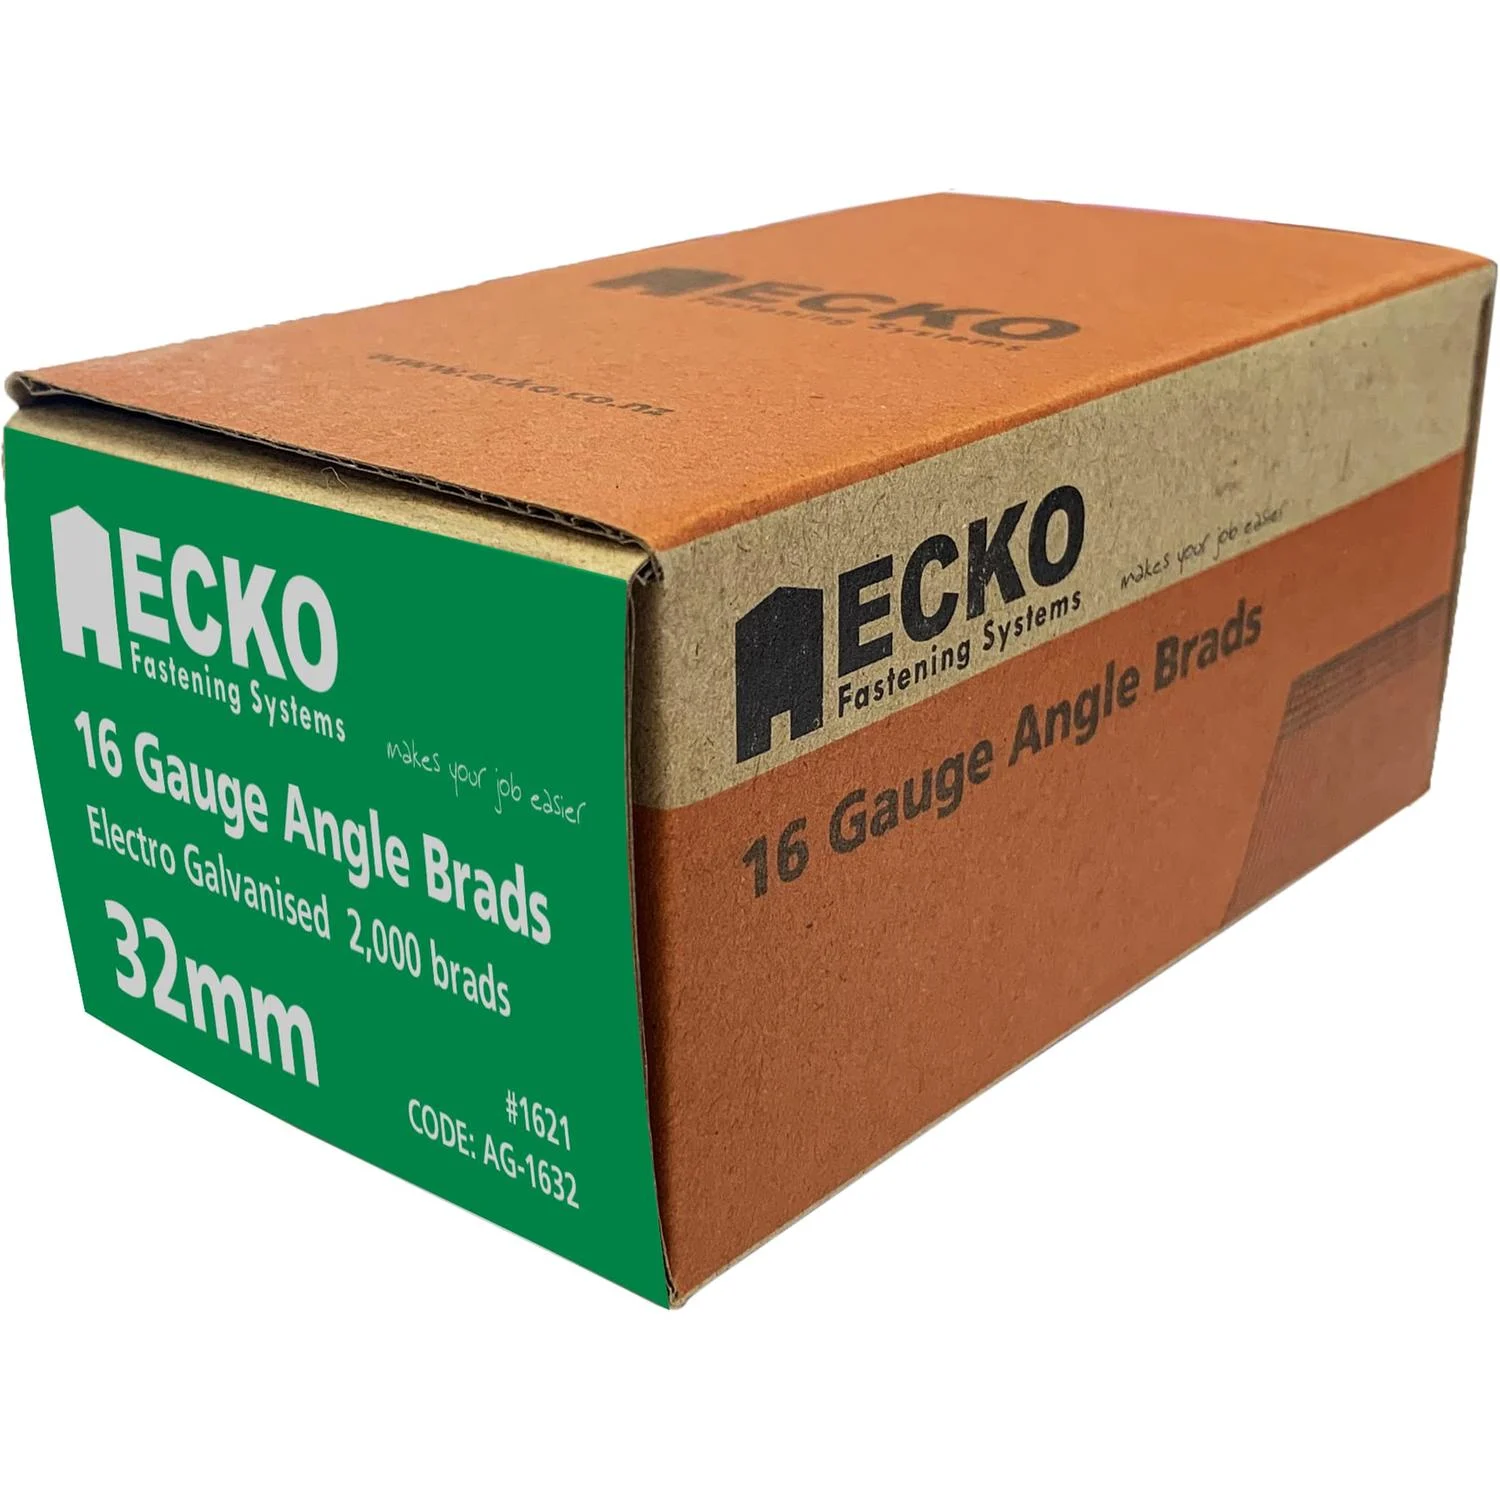 Ecko 16 Gauge Angle Brads Gasless Pack 32 X 1.6Mm Electro Galvanised (2000)